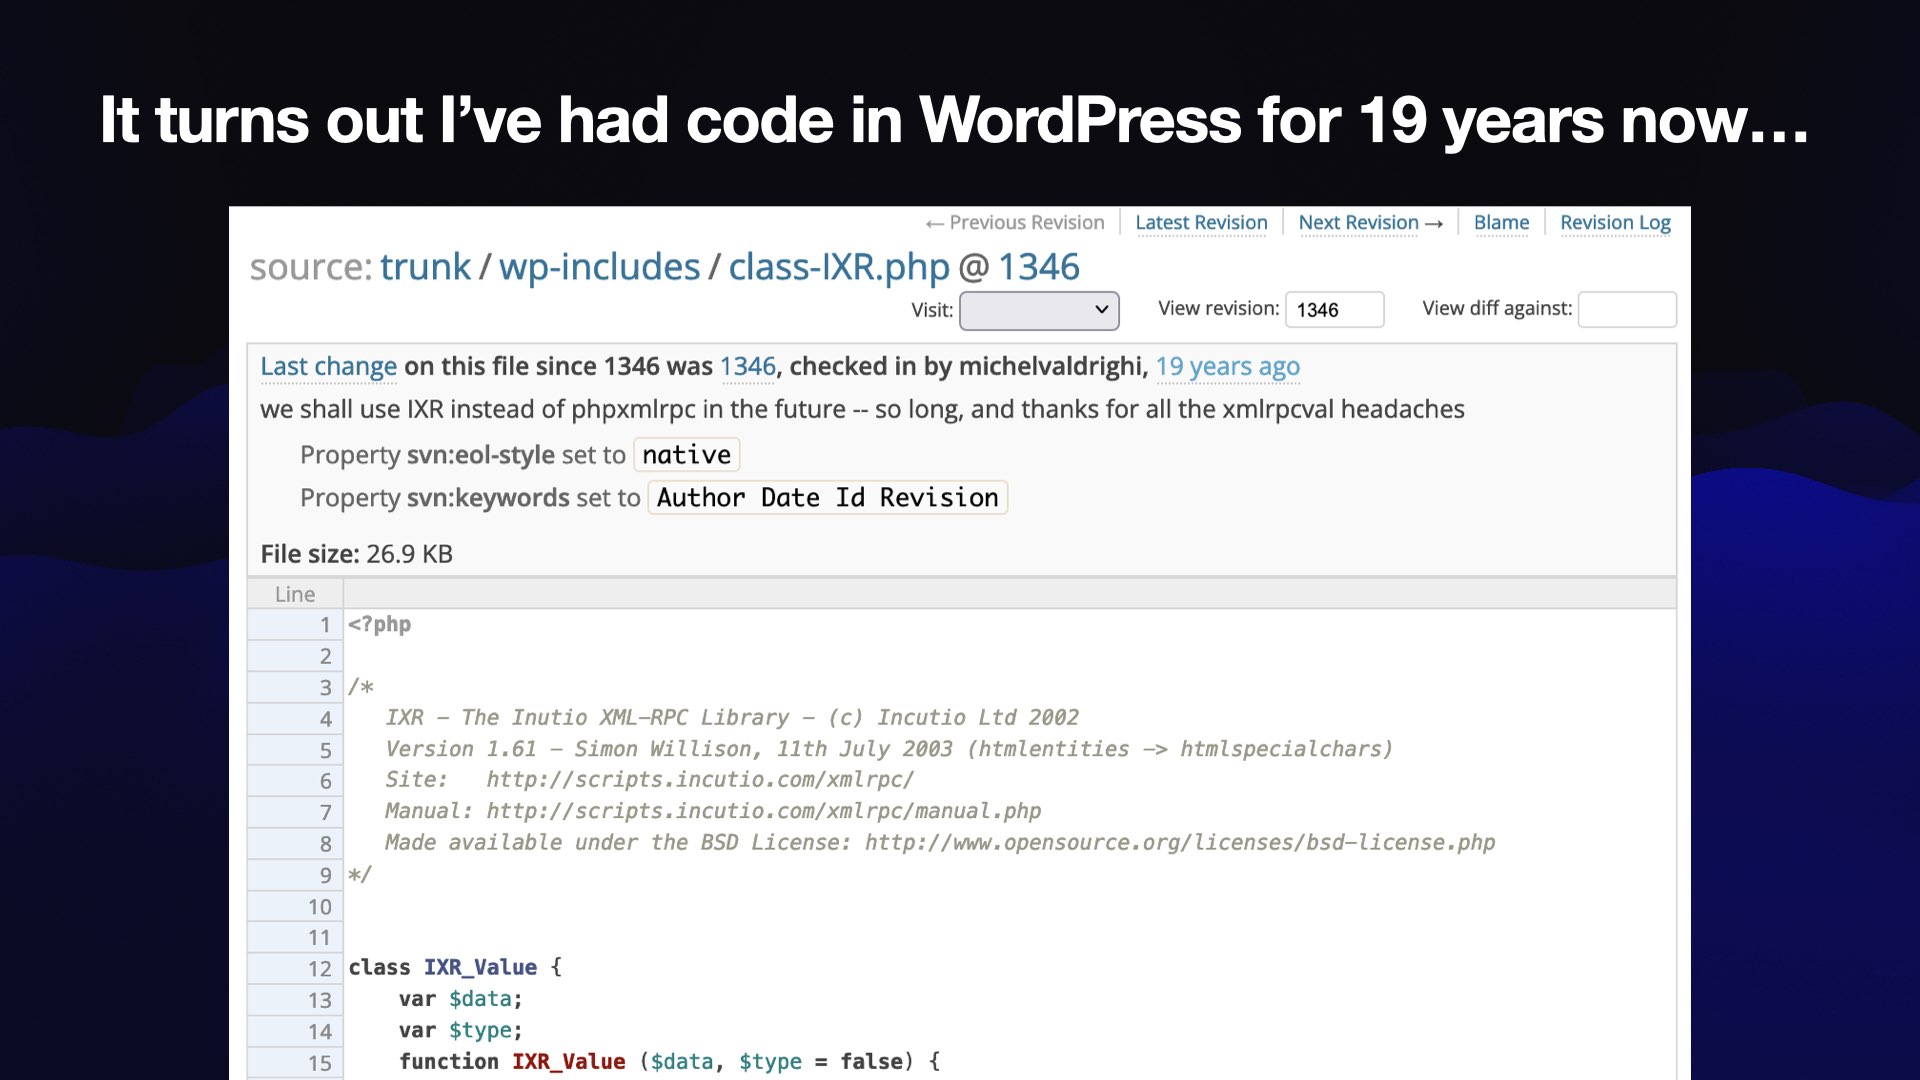 It turns out I’ve had code in WordPress for 19 years now...  Screenshot of WordPress Subversion:  trunk / wp-includes / class-IXR.php @ 1346  checked in by michelvaldrighi, we shall use IXR instead of phpxmlrpc in the future -- so long, and thanks for all the xmlrpcval